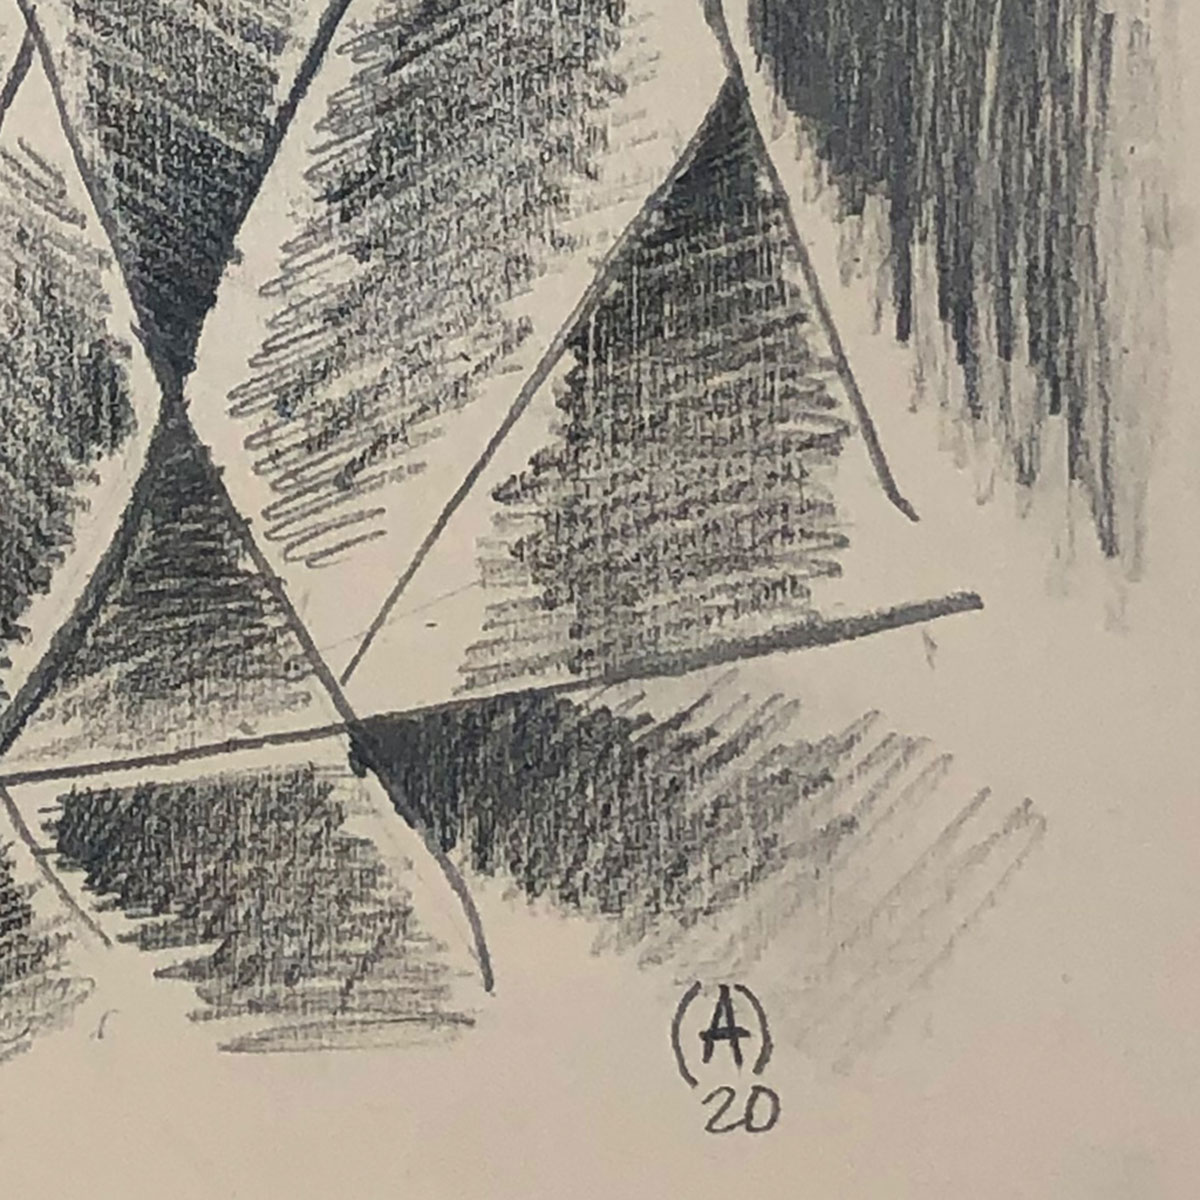 Graphite drawing of shaded triangular shapes in gray against a white backdrop